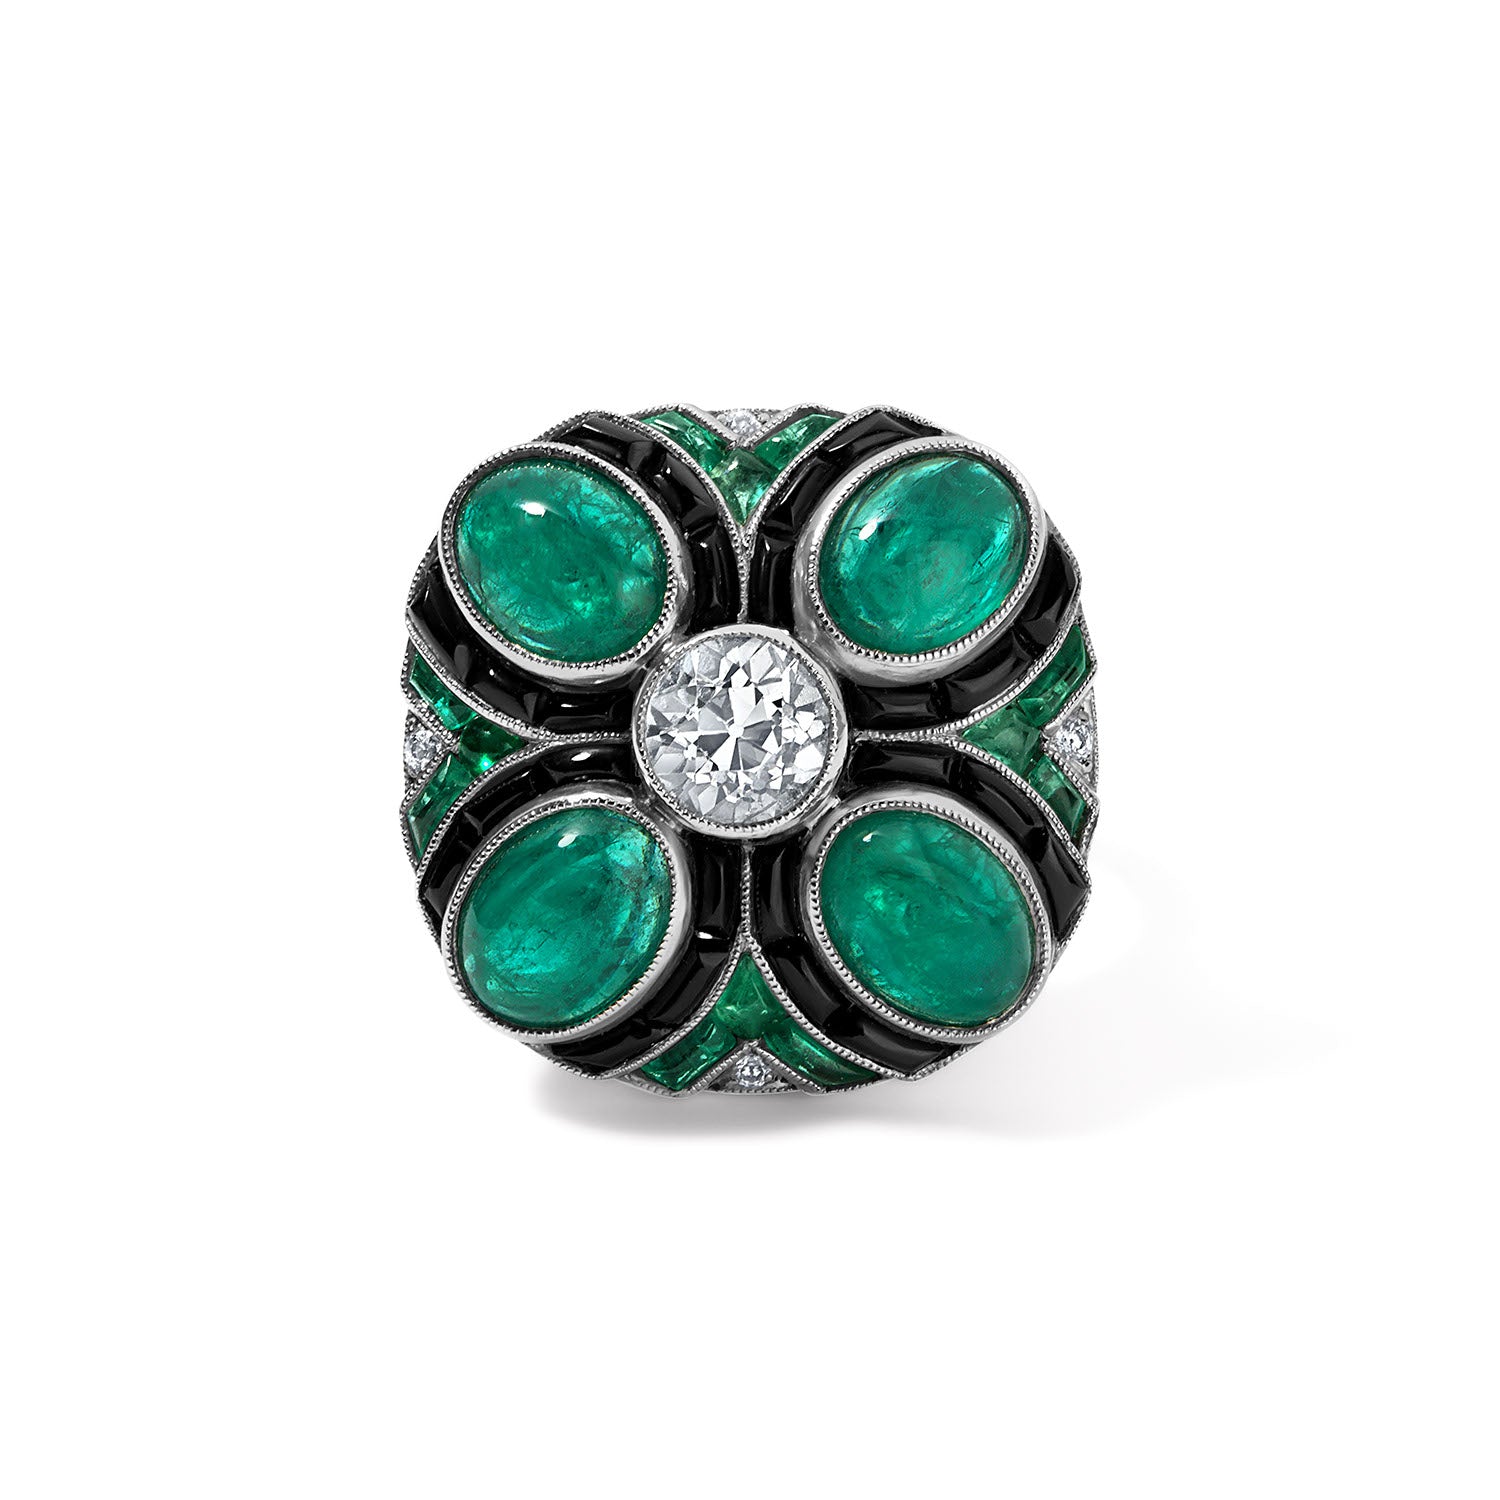 Deco Diamond, Emerald, and Onyx Cocktail Ring